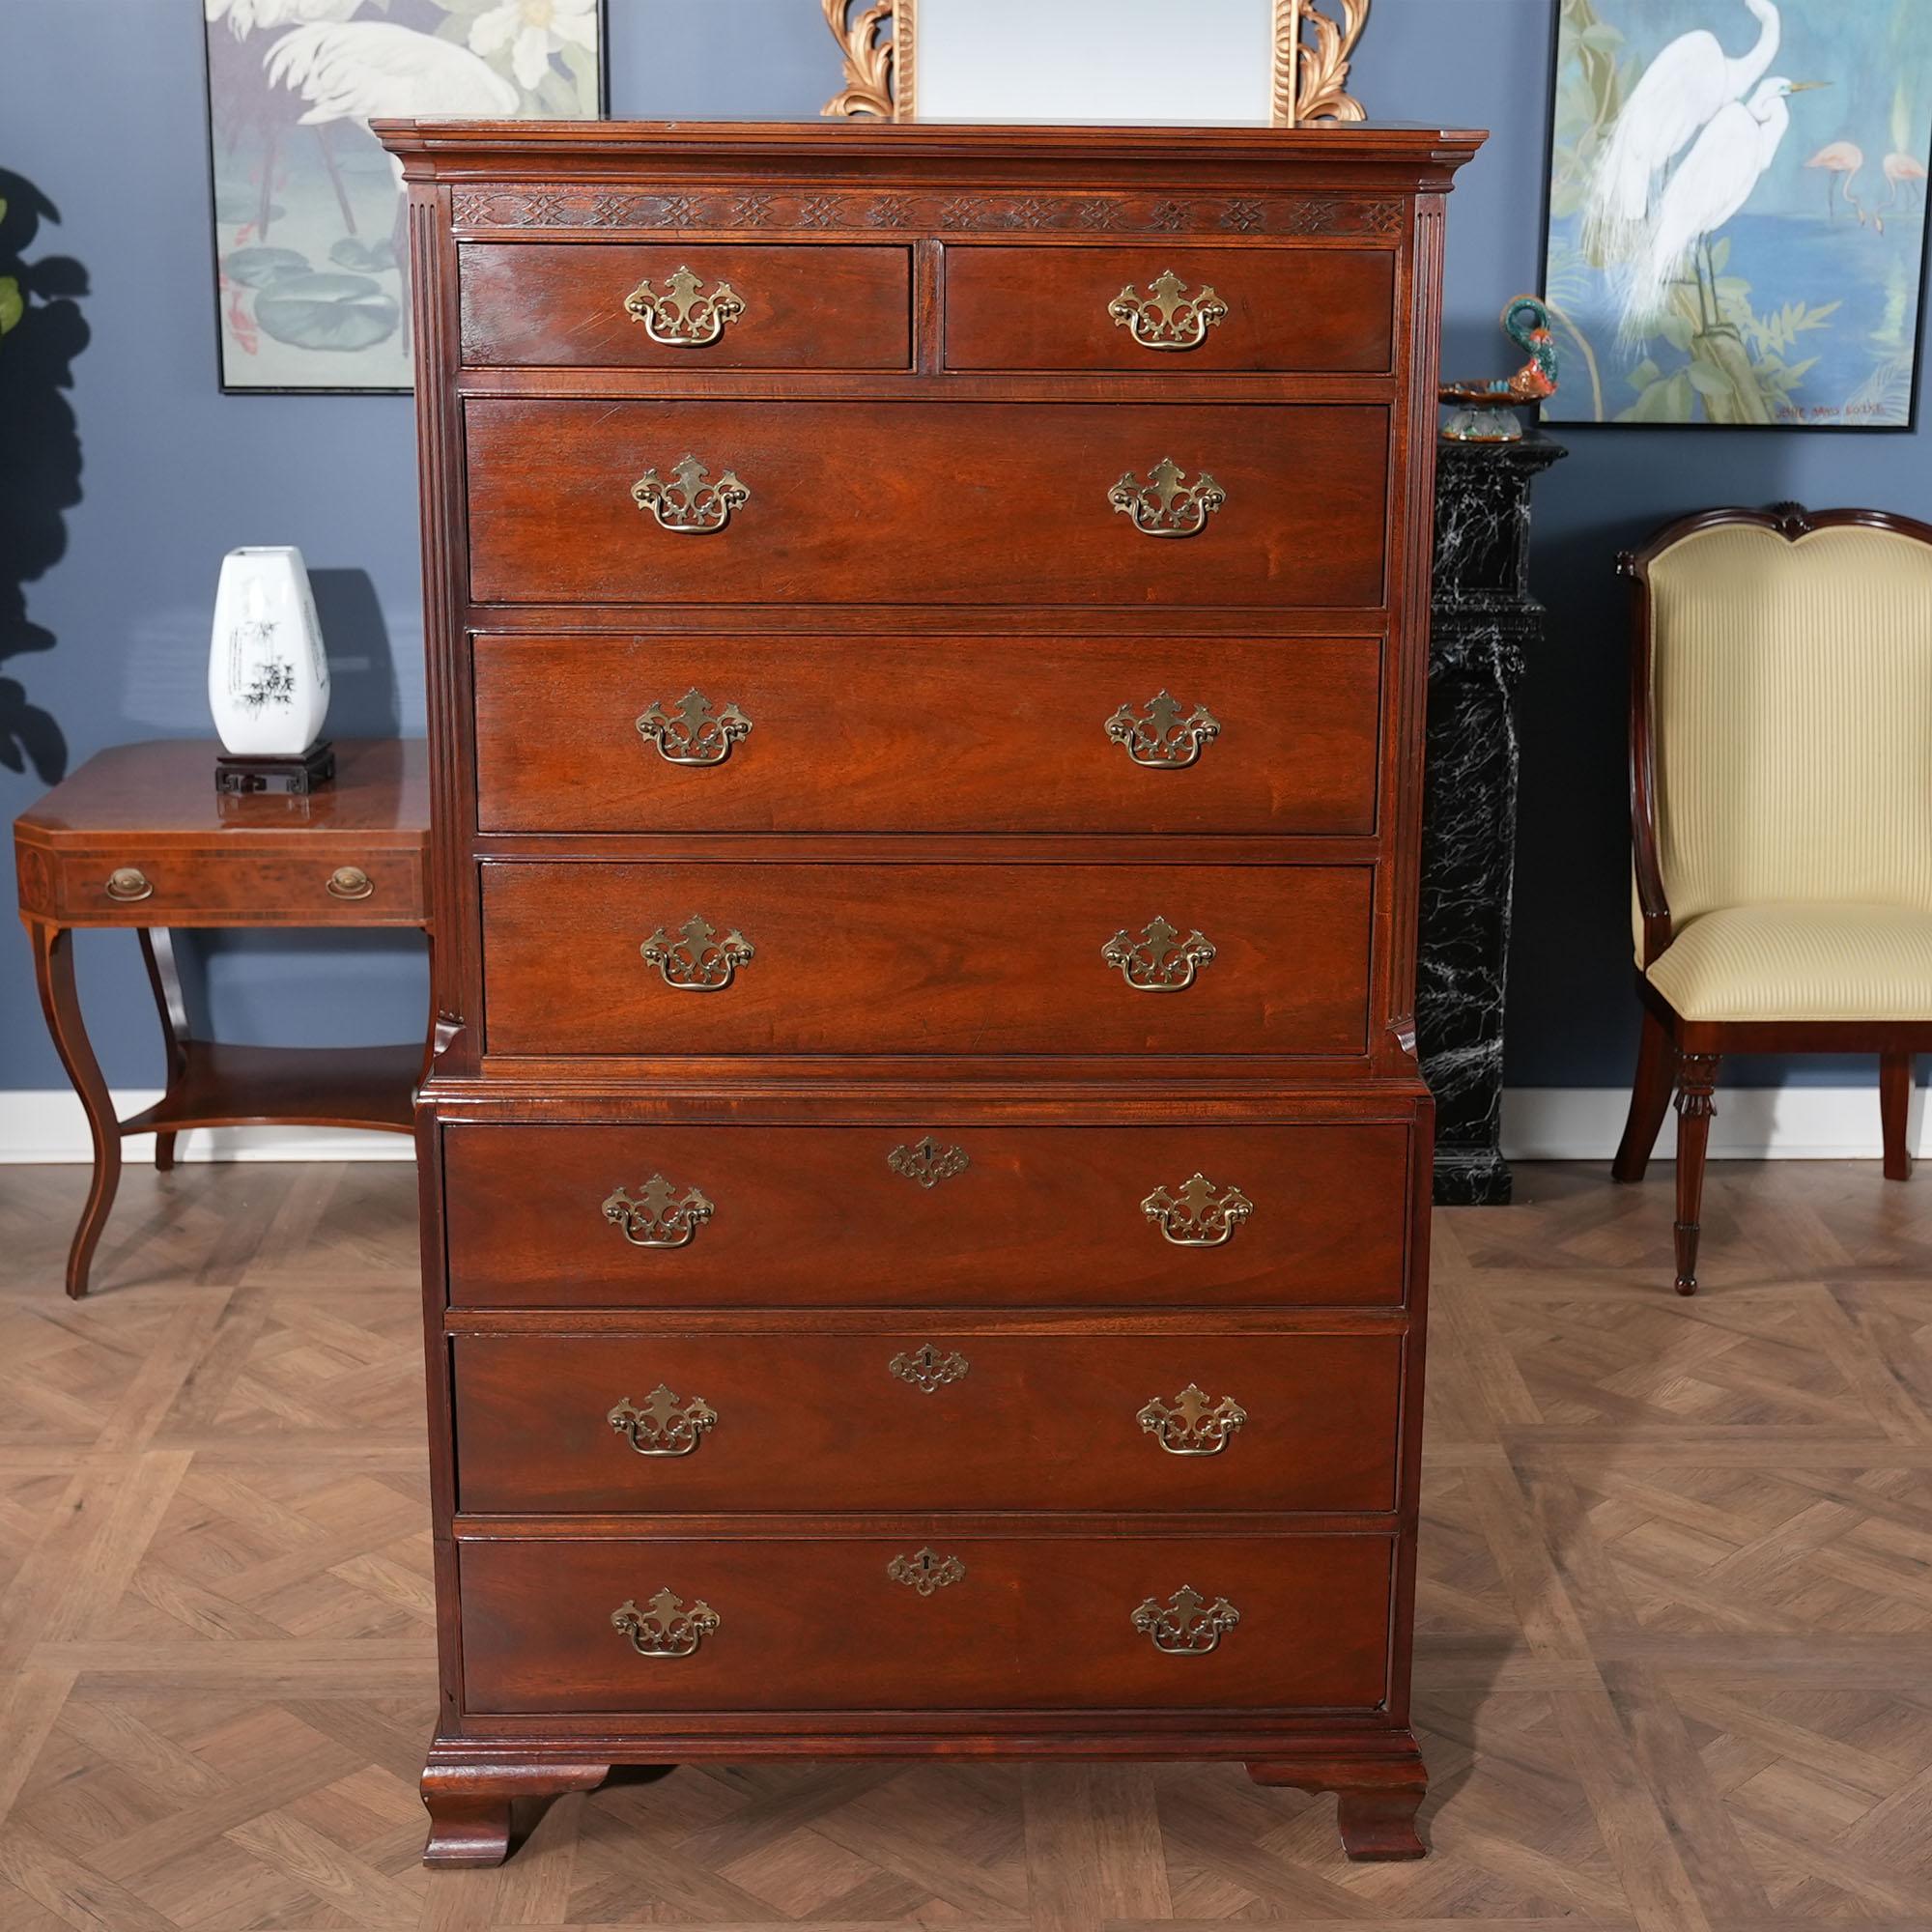 A vintage Baker Mahogany High Chest which will be the focal point of any room in which it is placed. Originally designed for the bedroom the practical storage space provided by this chest would be welcome anywhere in the home. Eight generous sized,